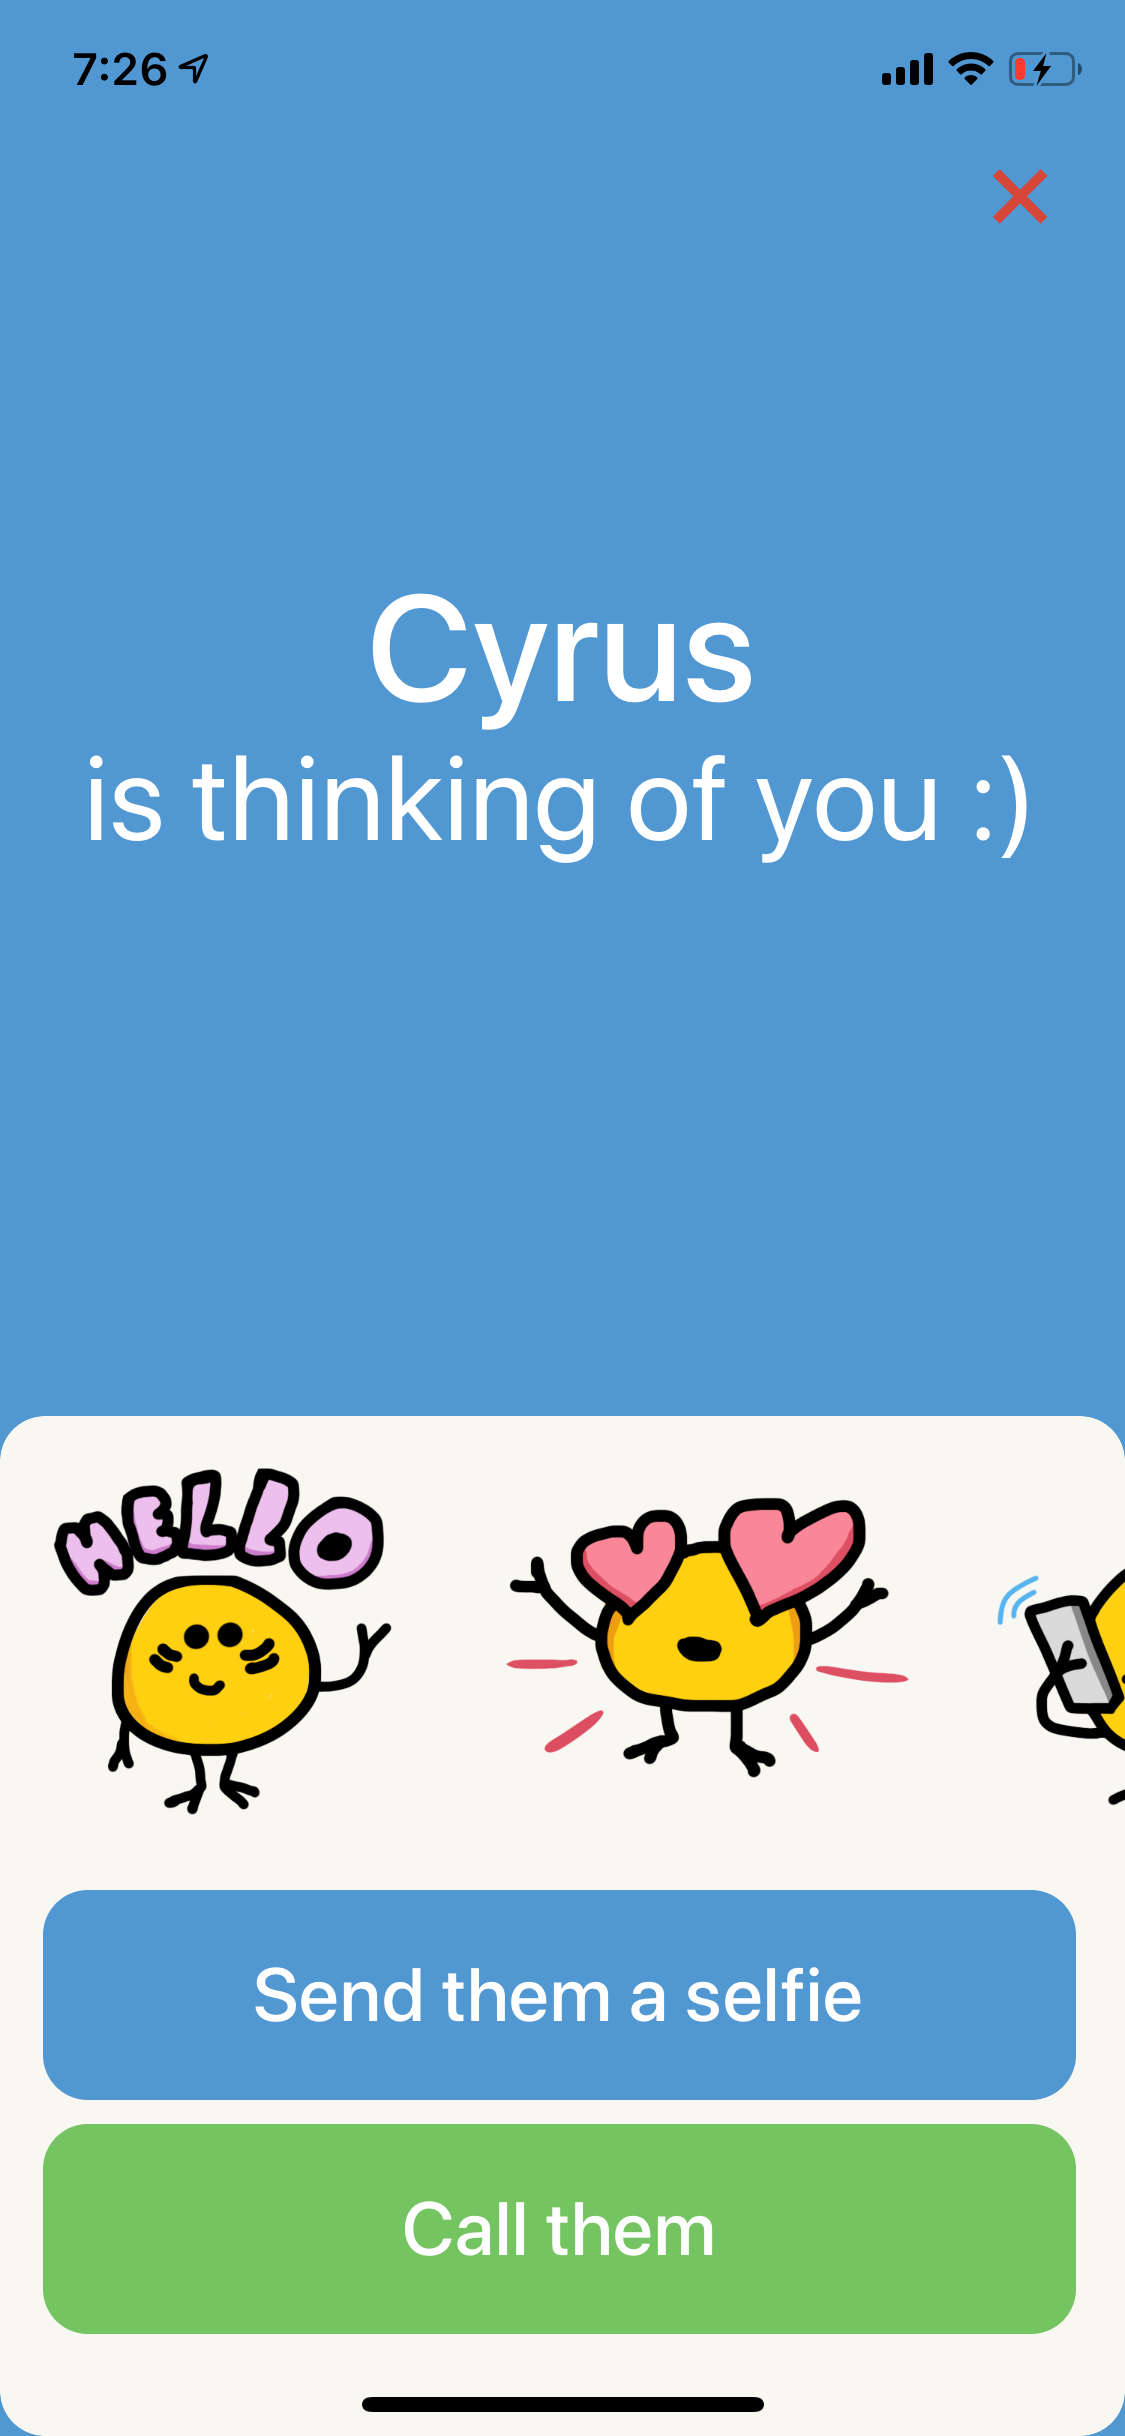 Screenshot of an iOS app with the prompt 'Cyrus is thinking of you :)' followed by options to select friendly stickers, send them a selfie or call them